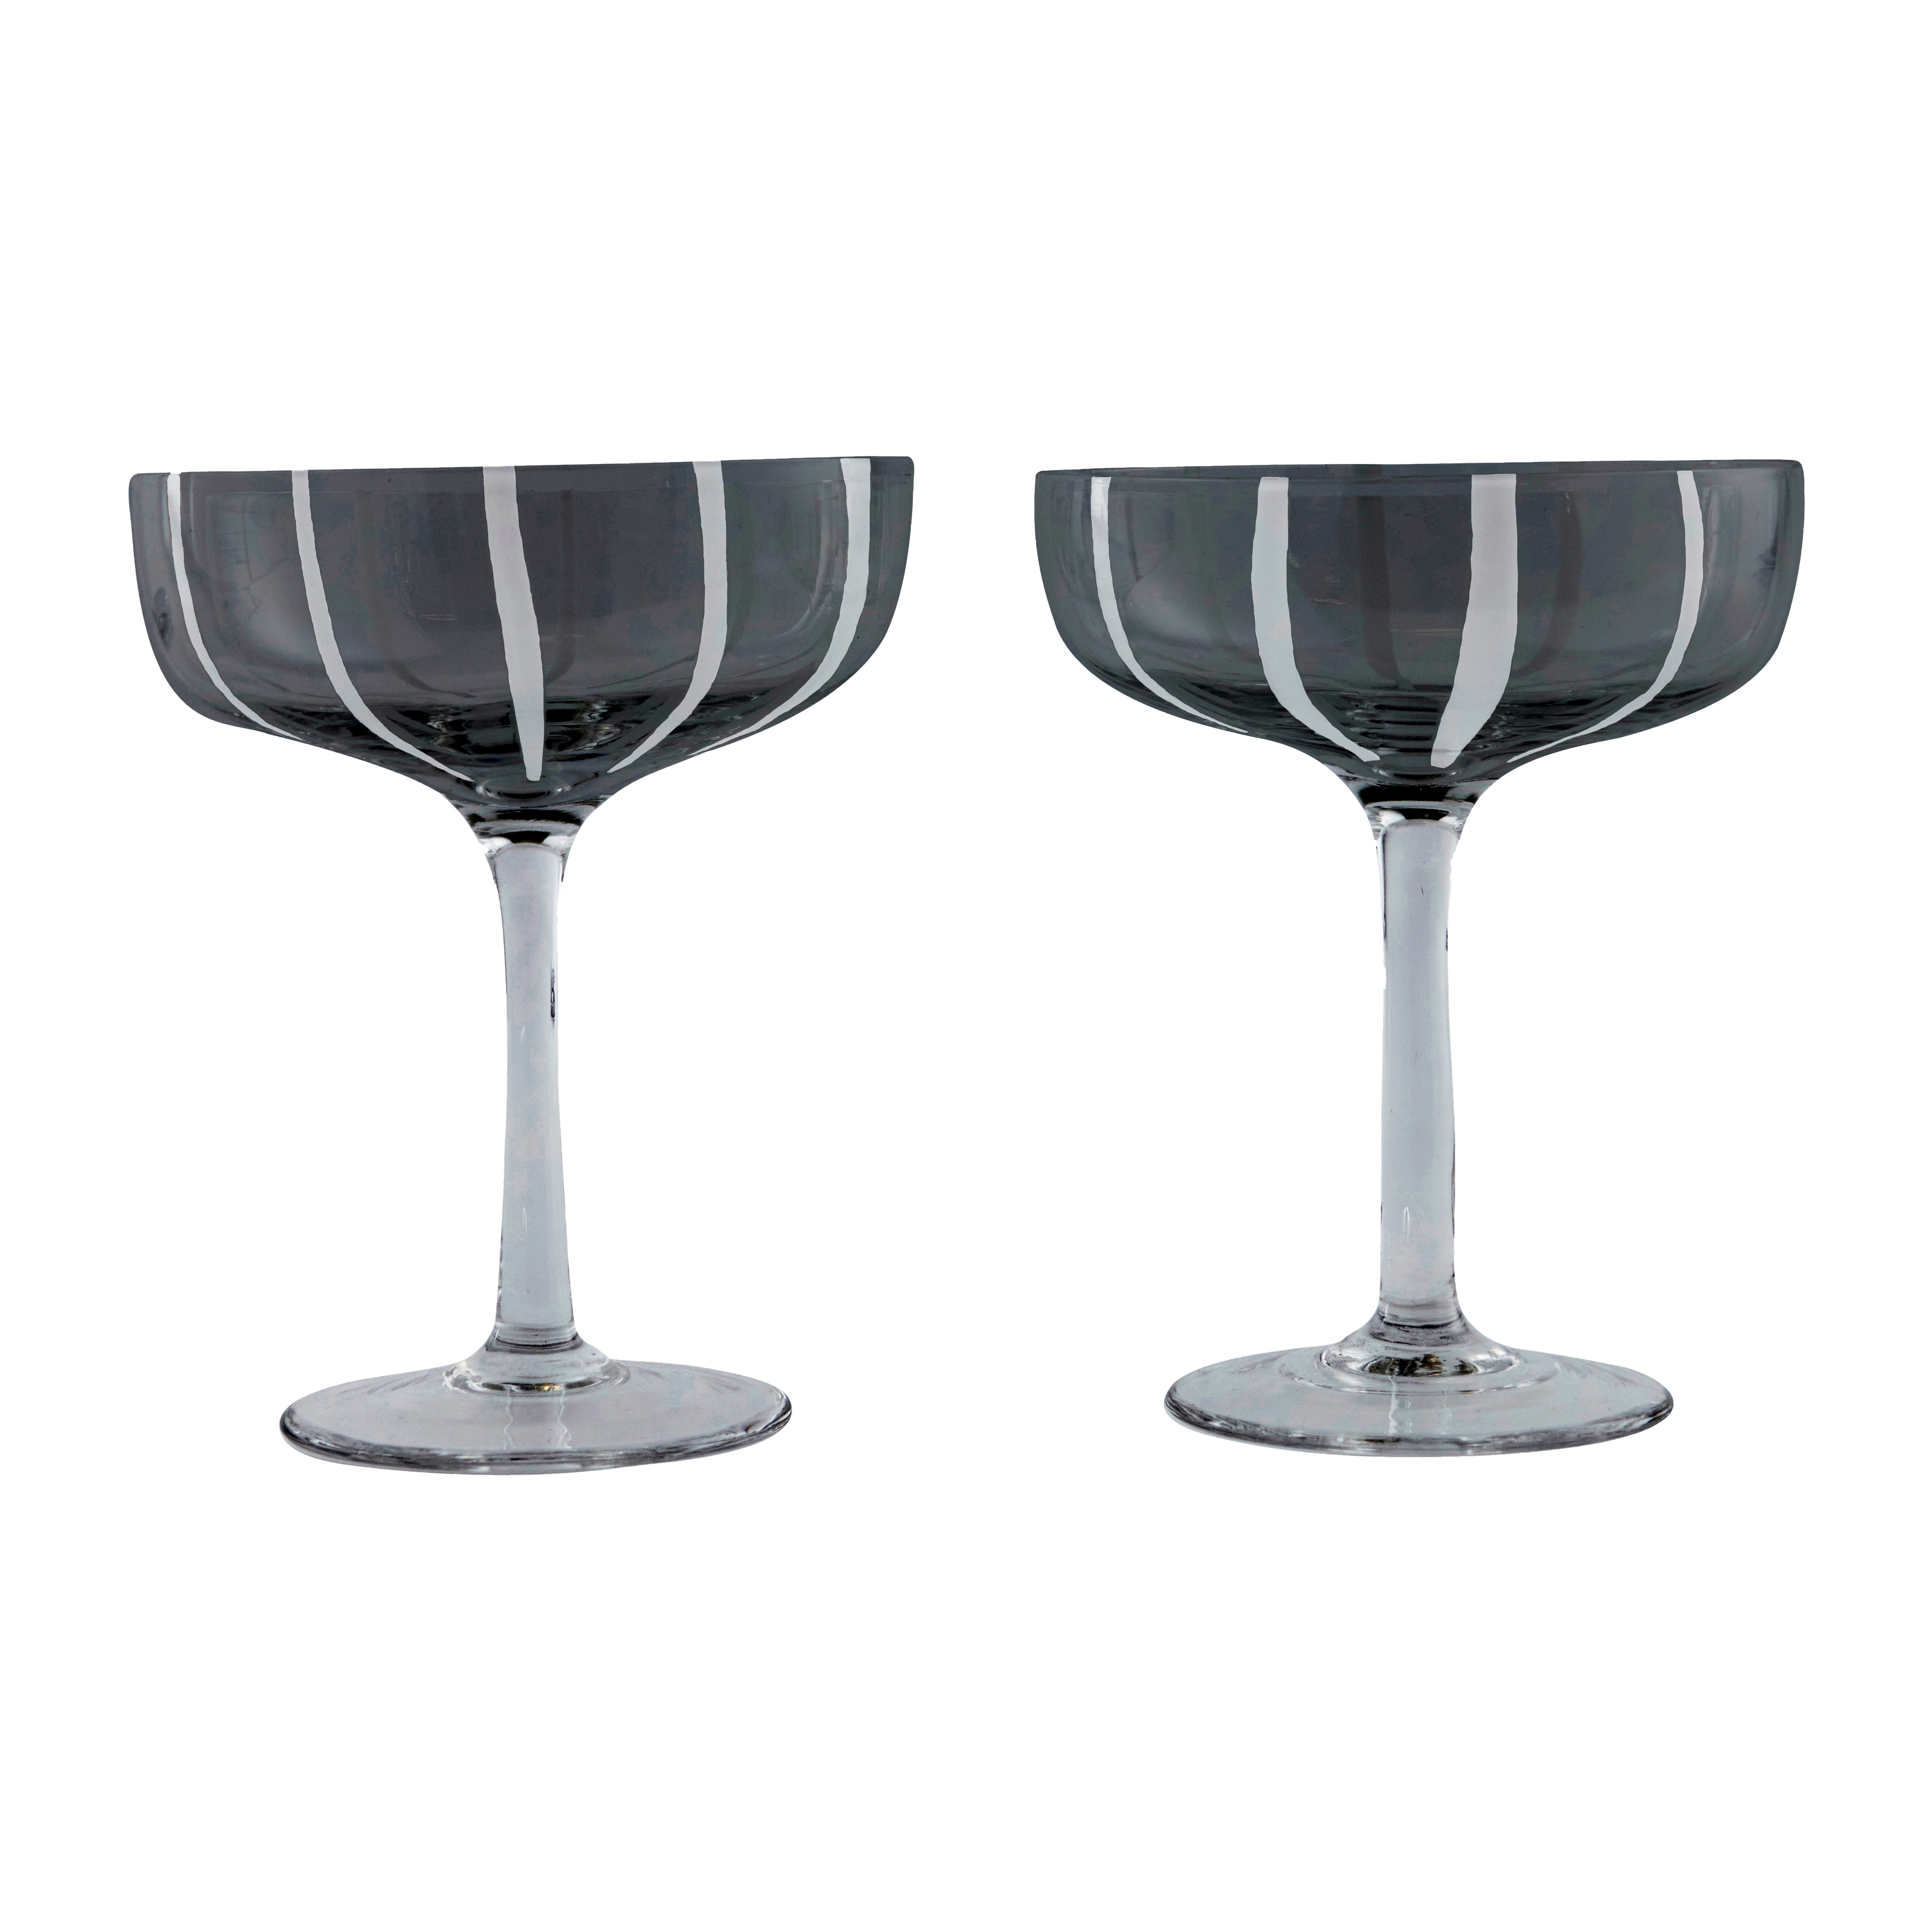 OYOY Mizu coupe champagne glass 2-pack